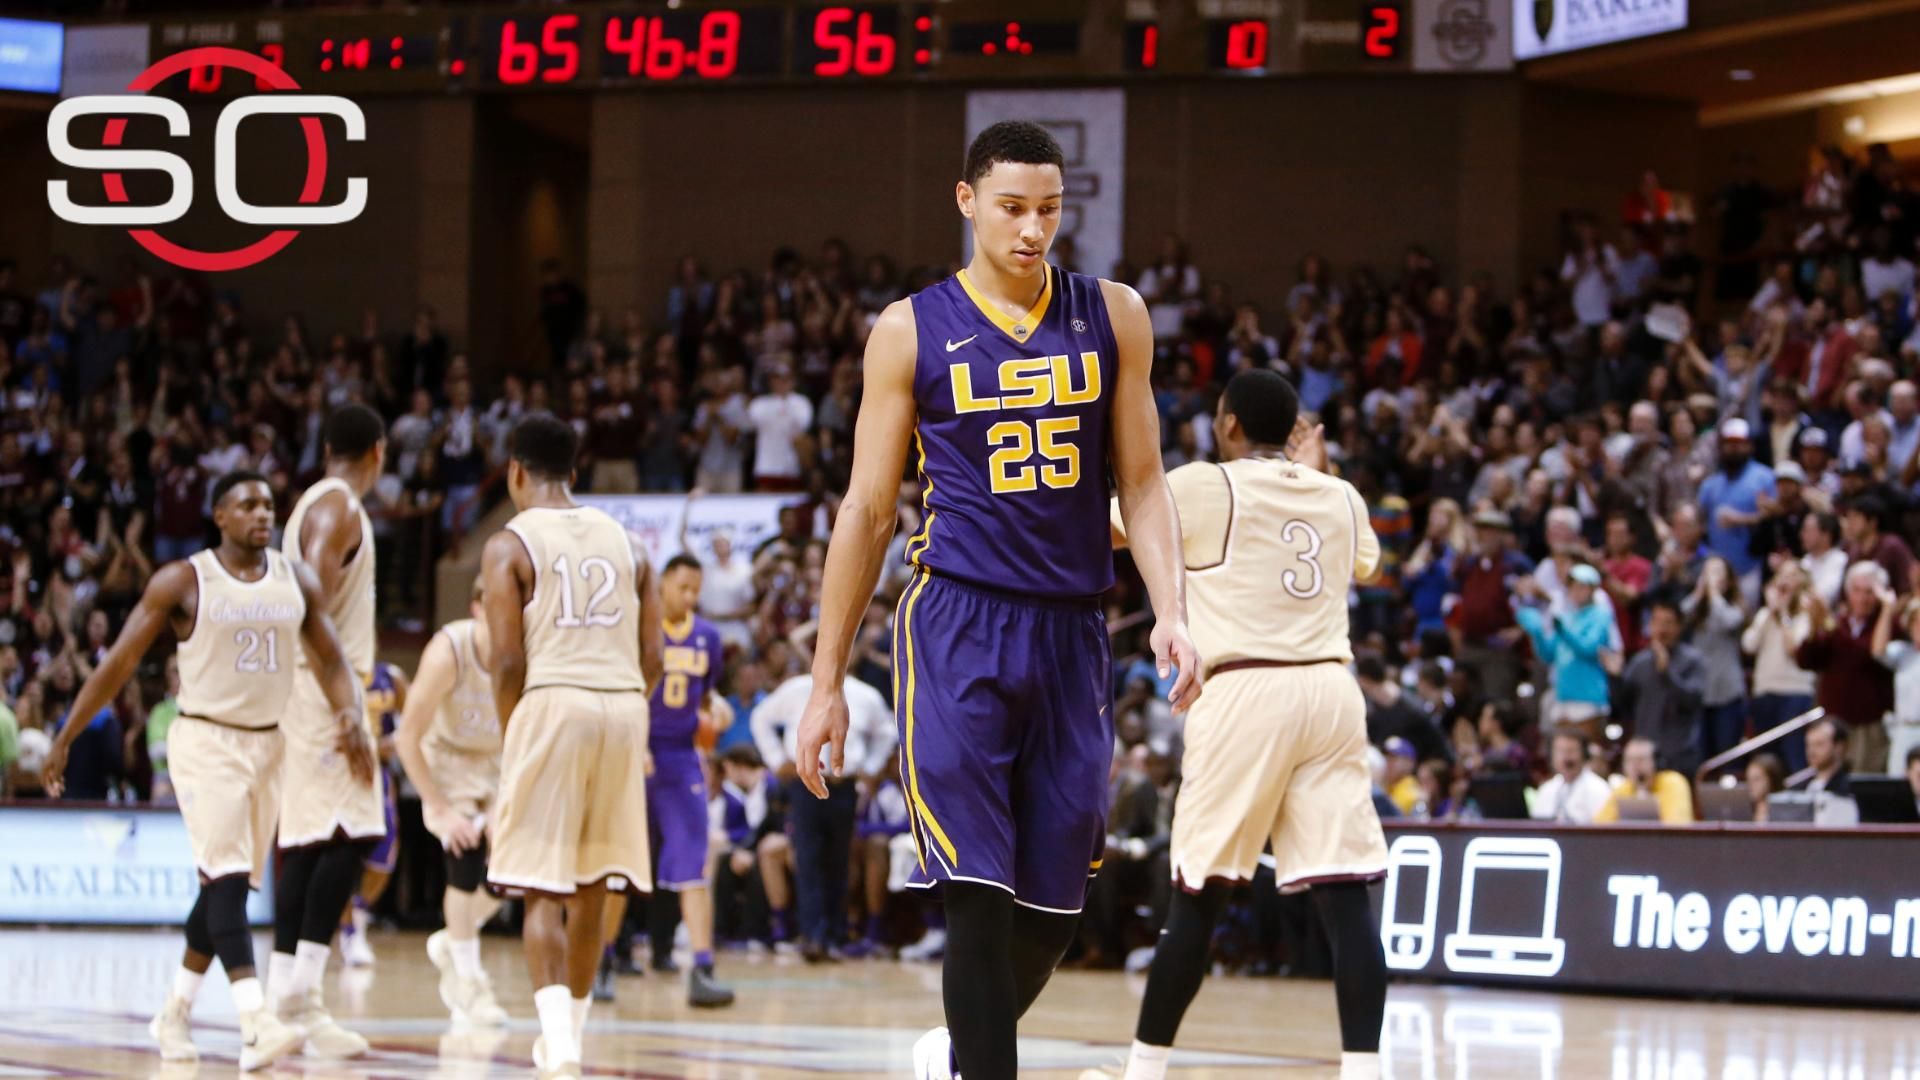 Simmons, LSU shocked by College of Charleston - ESPN Video1920 x 1080